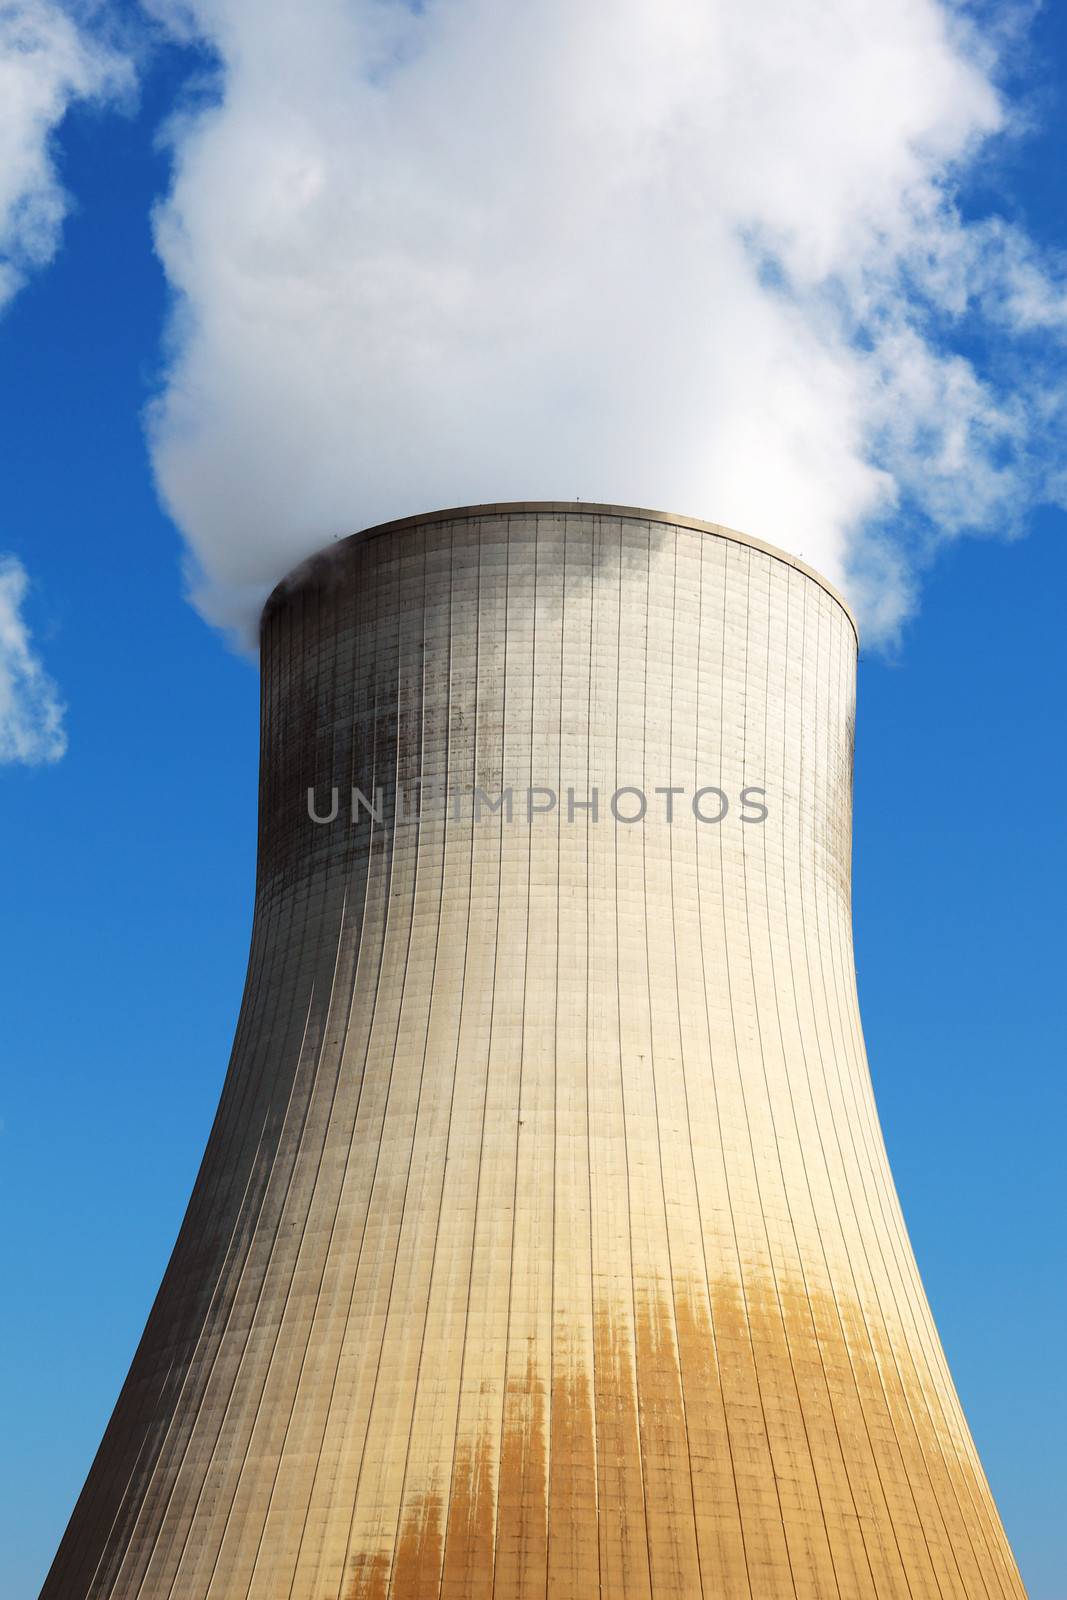 Nuclear power station cooling tower in blue sky